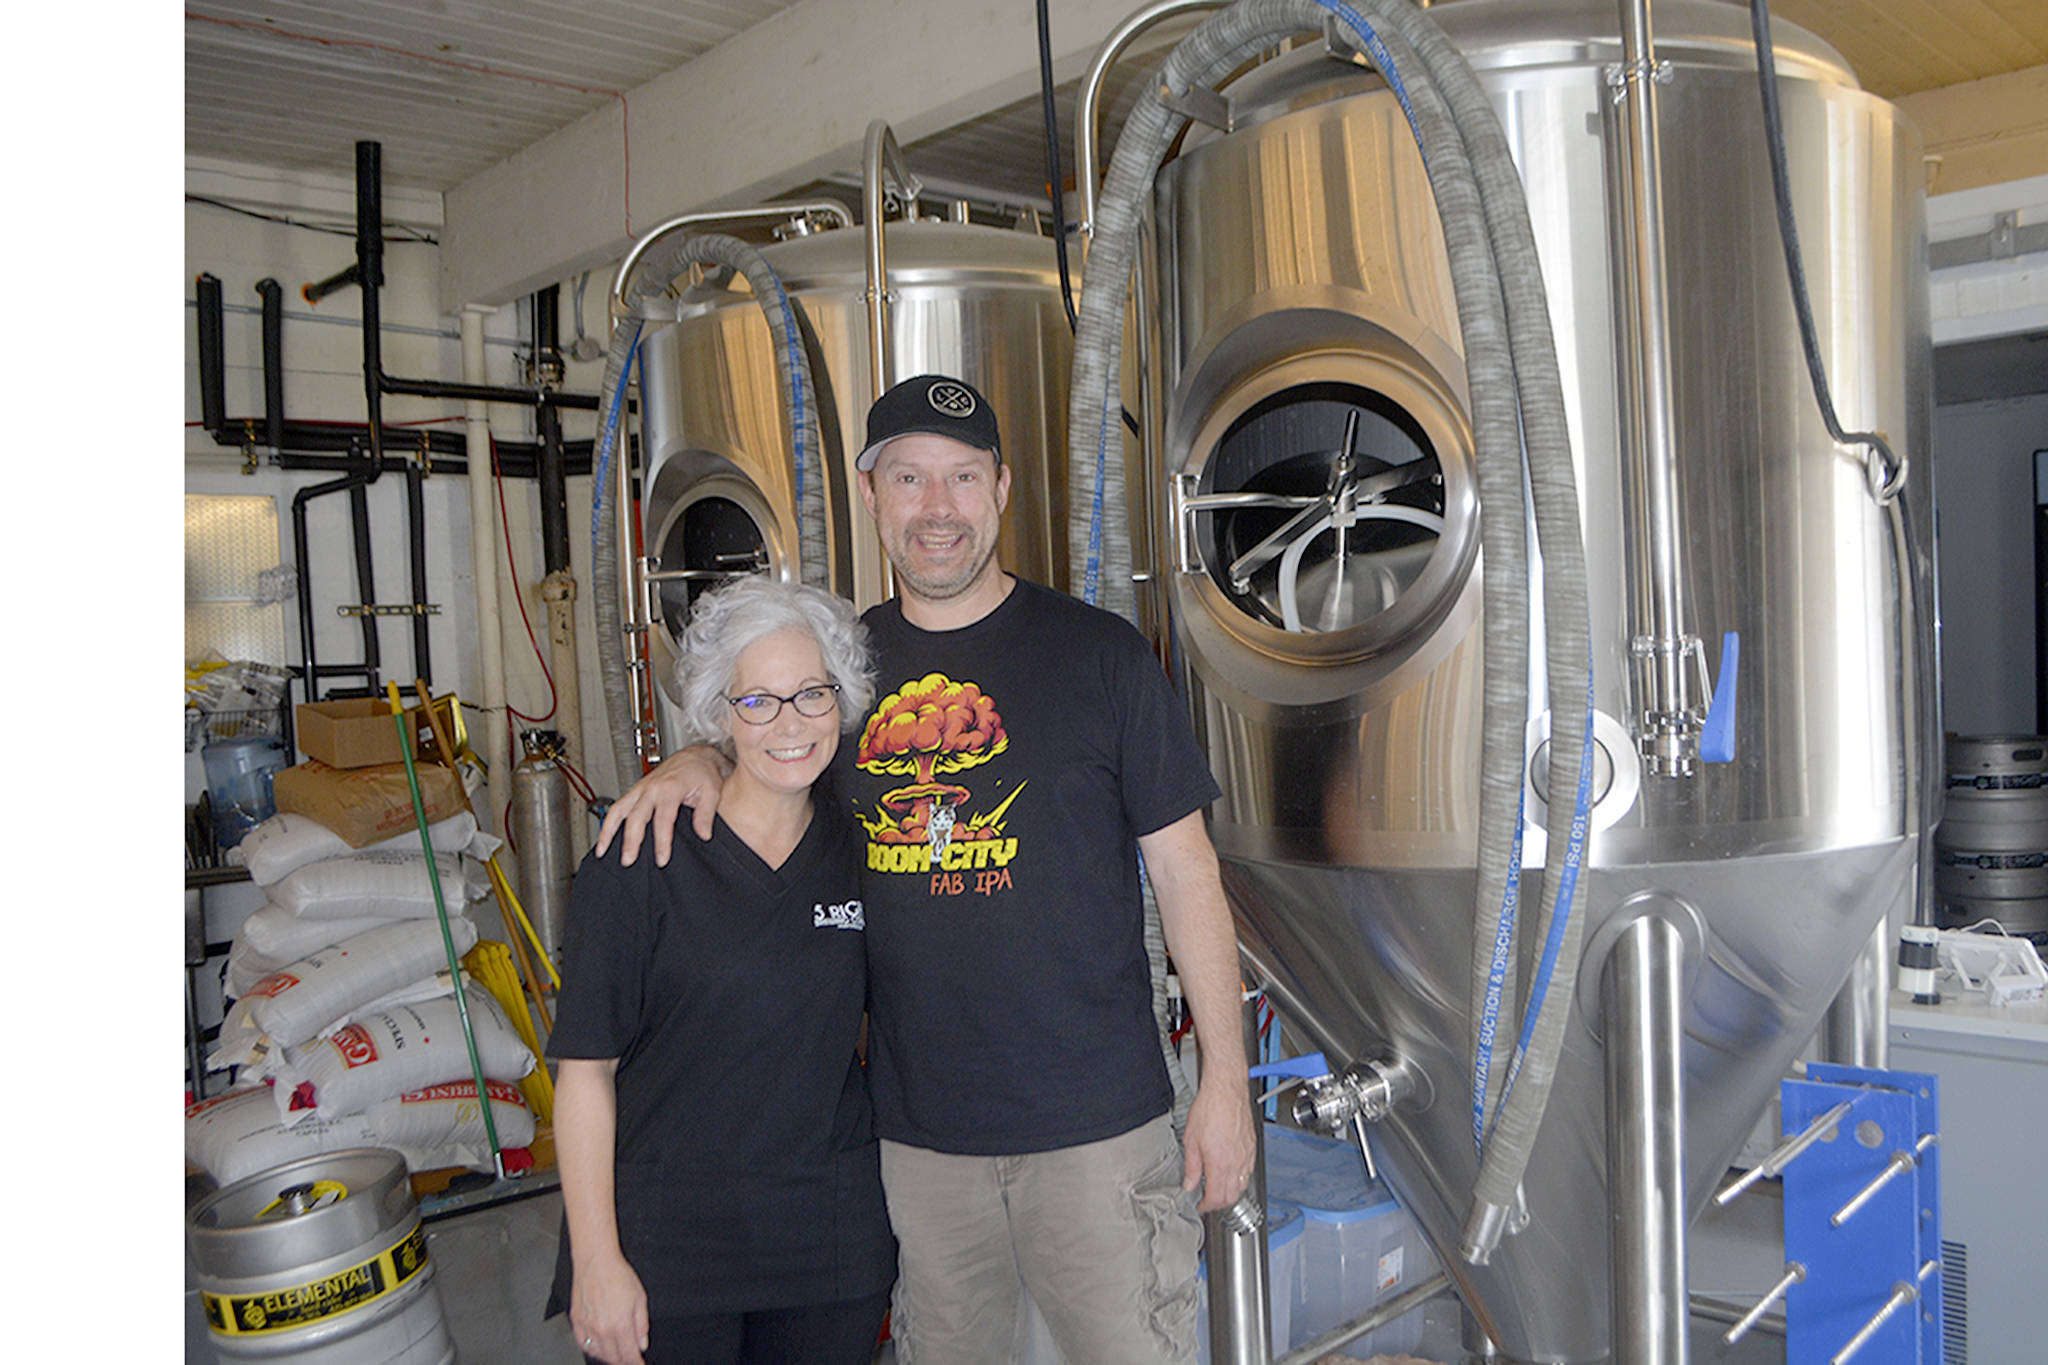 Steve Powell/Staff Photo Kristi and R.J. Whitlow’s new tanks will allow them to brew their beer on site, instead of renting spots at other breweries or making it at home.